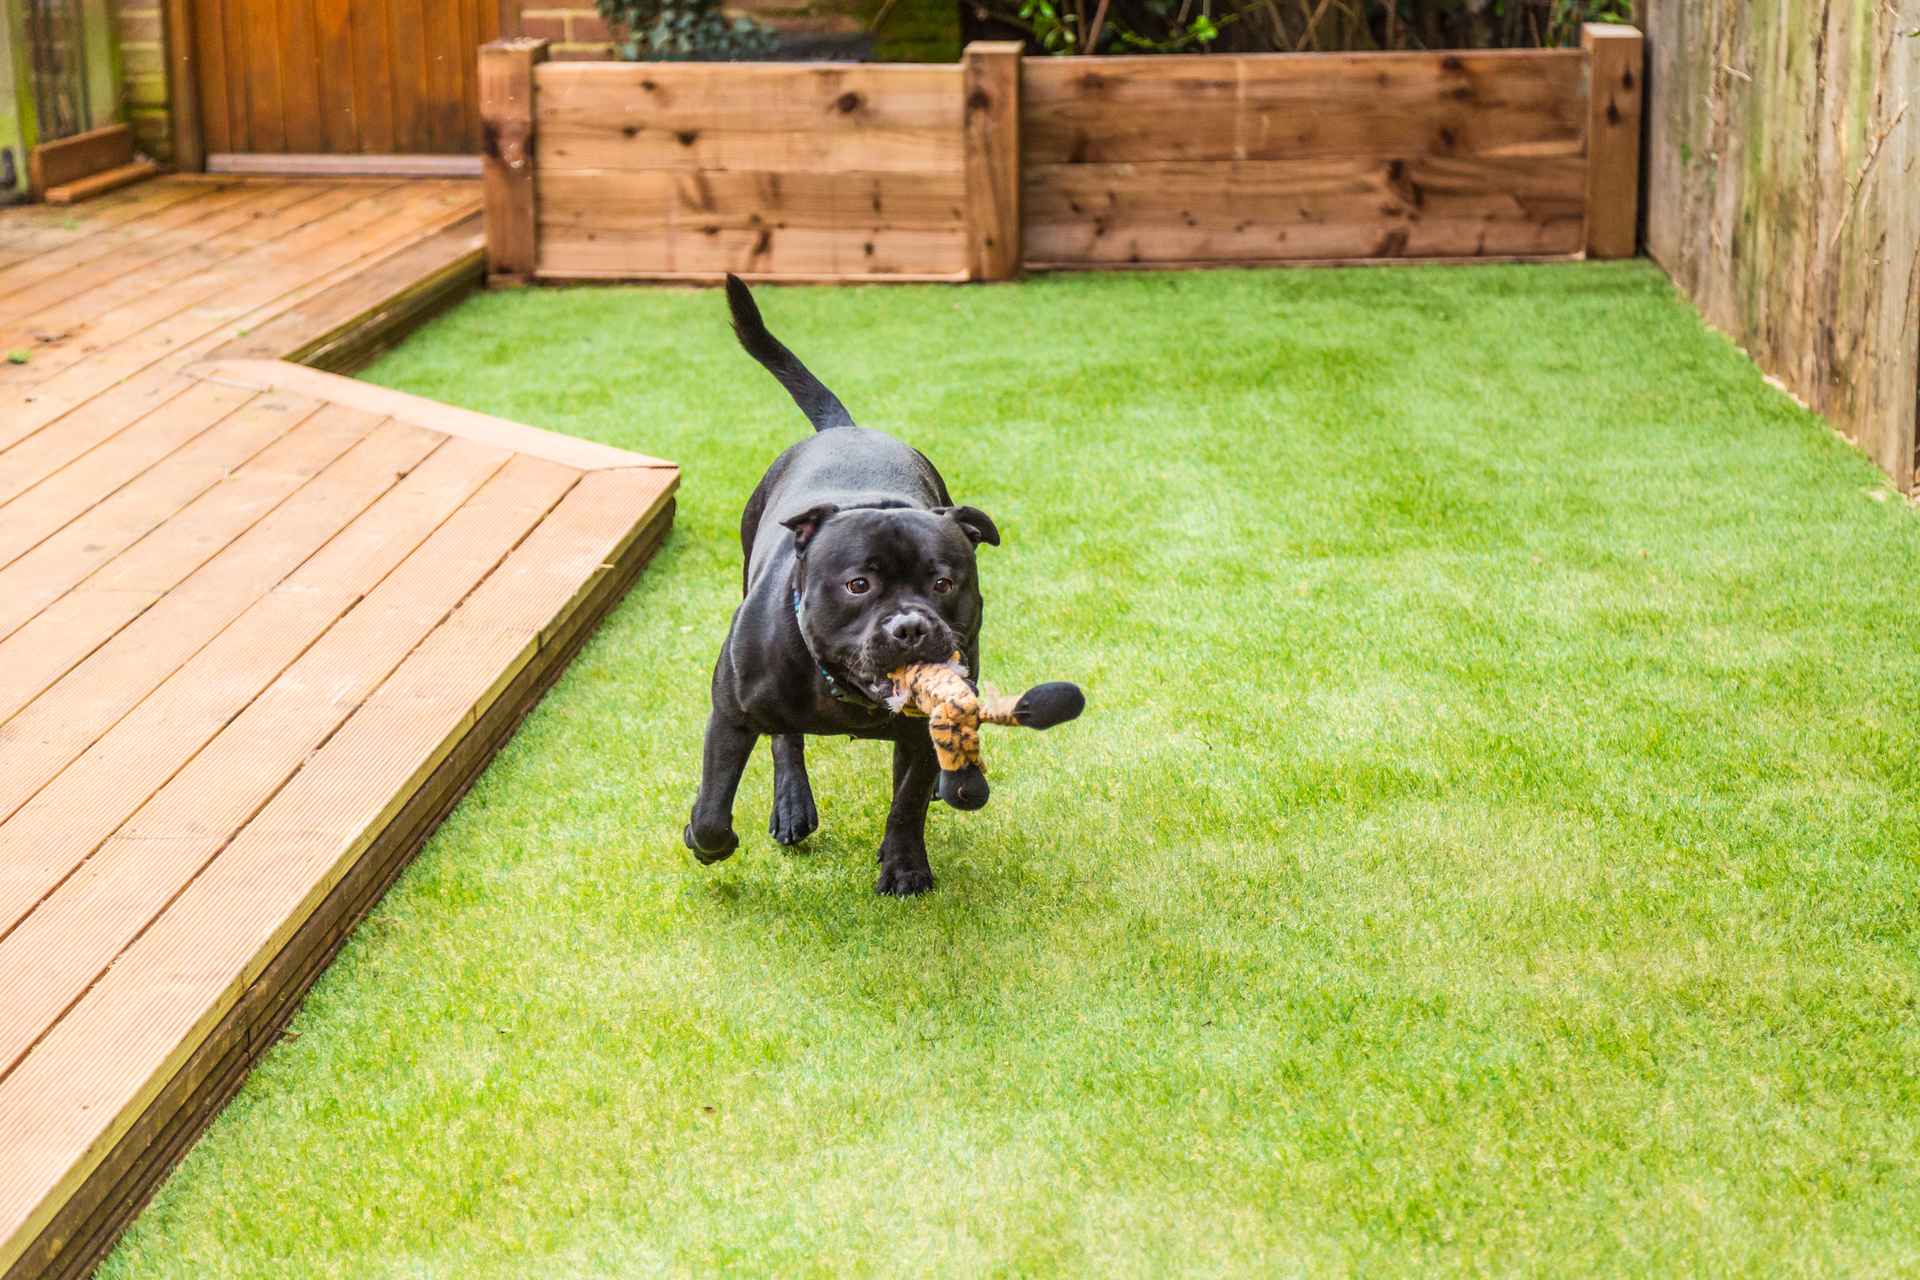 Dog happily playing in artificial turf